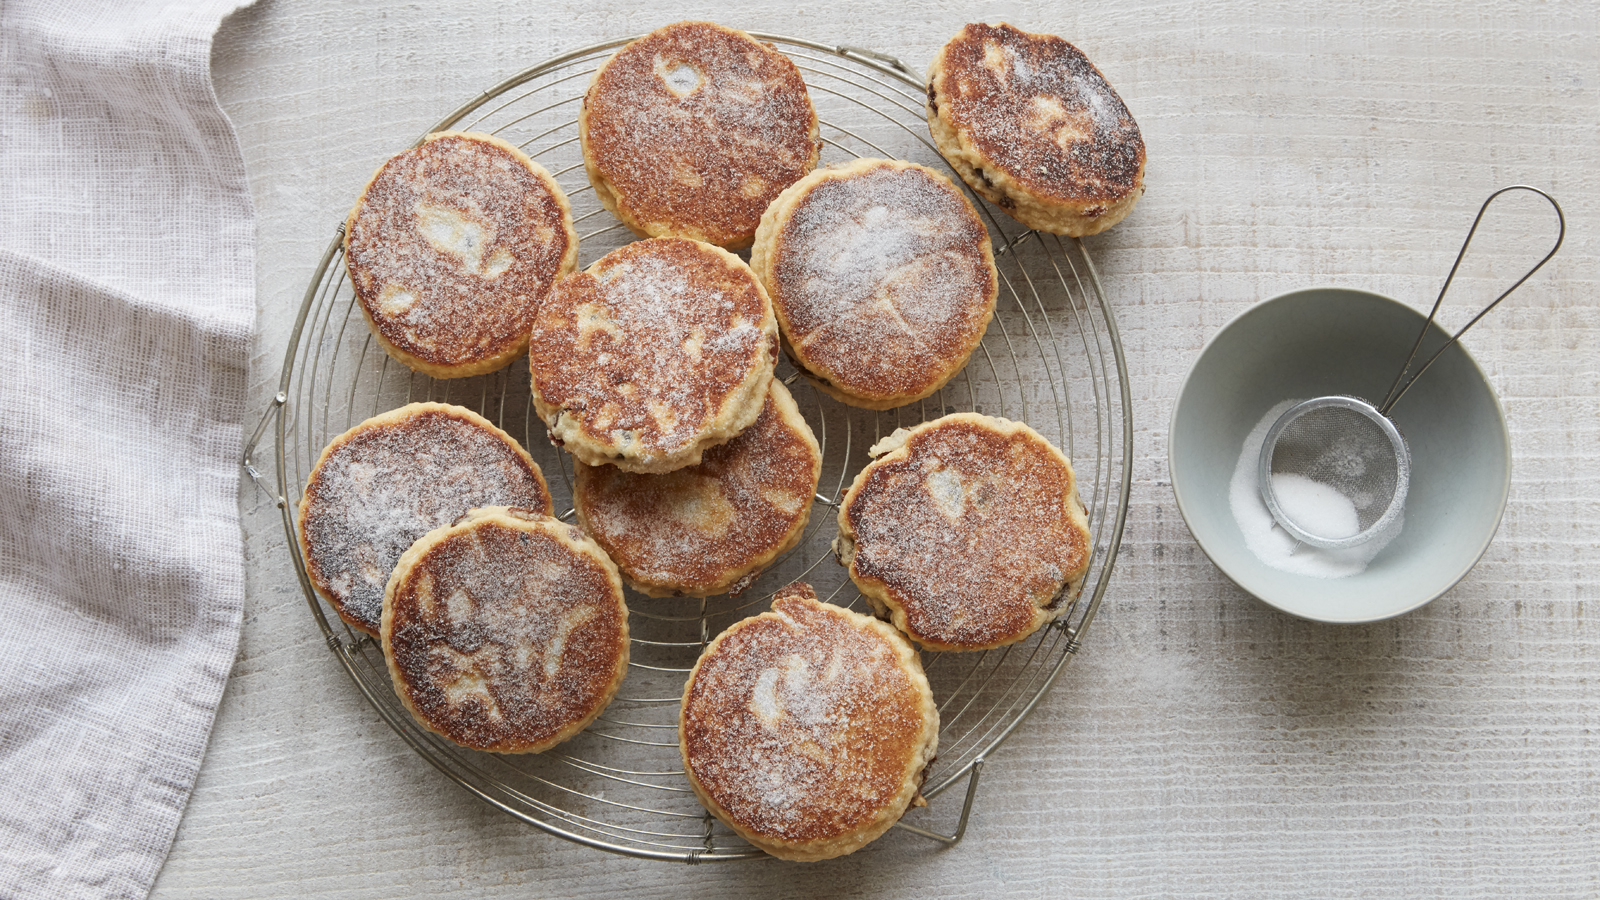 🥖 How Many Baked Goods Have You Tried from Around the World? Welsh Cakes